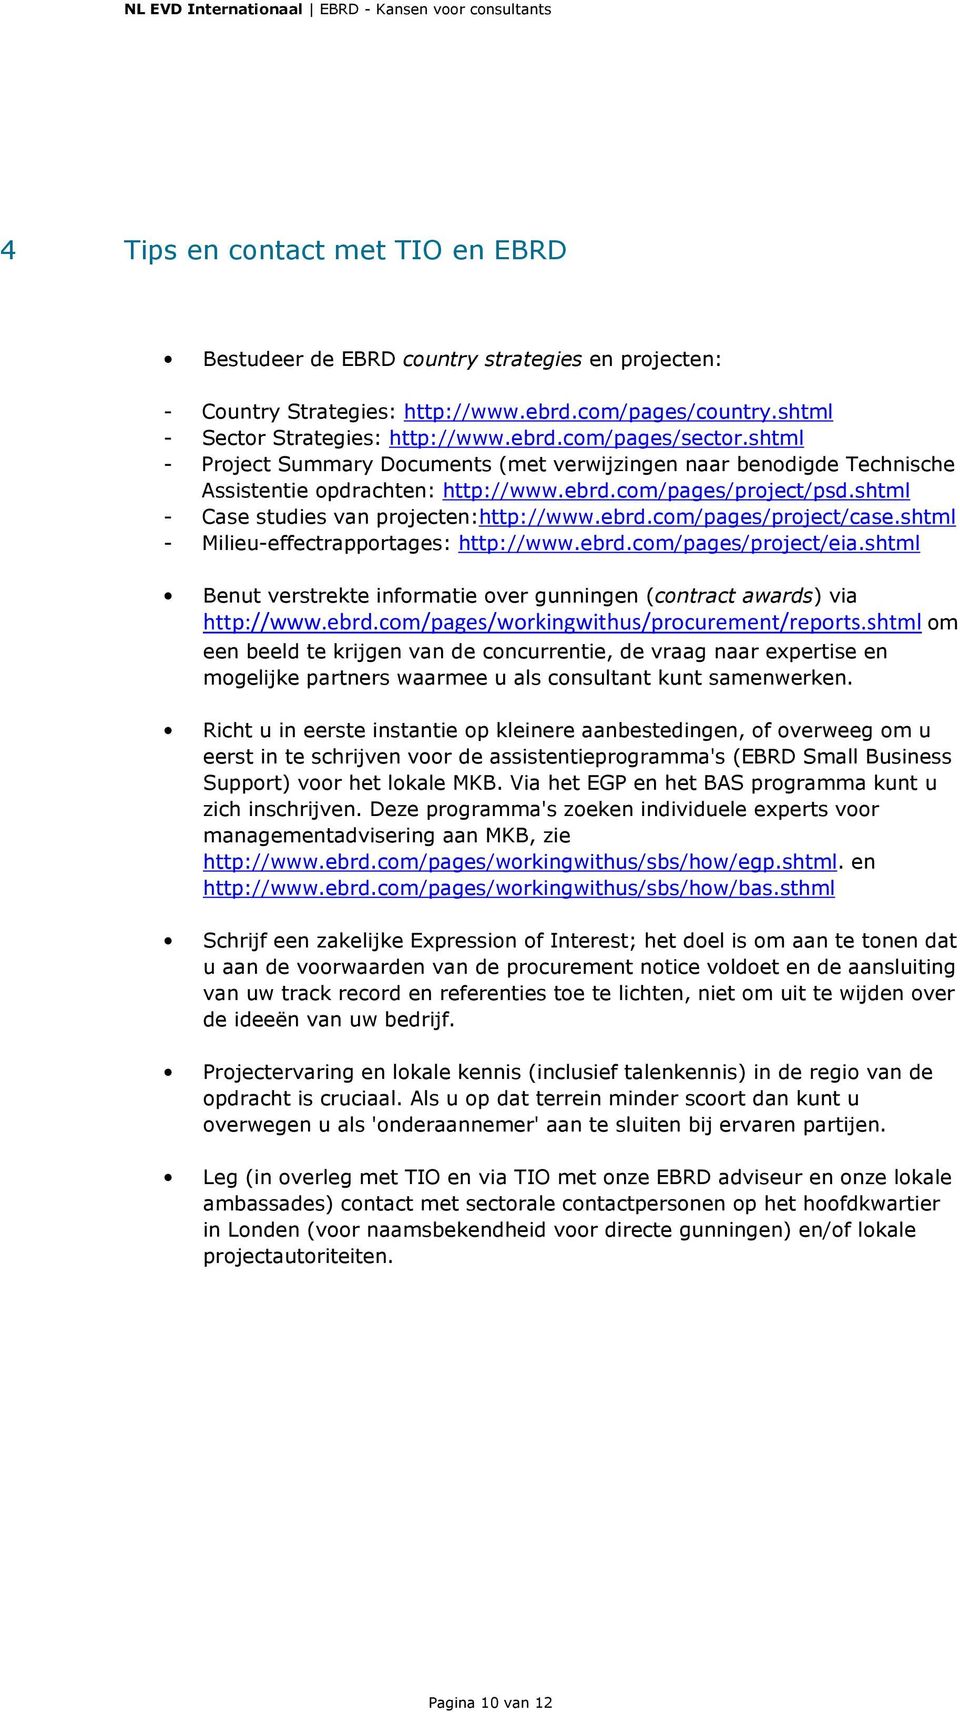 shtml - Milieu-effectrapportages: http://www.ebrd.com/pages/project/eia.shtml Benut verstrekte informatie over gunningen (contract awards) via http://www.ebrd.com/pages/workingwithus/procurement/reports.